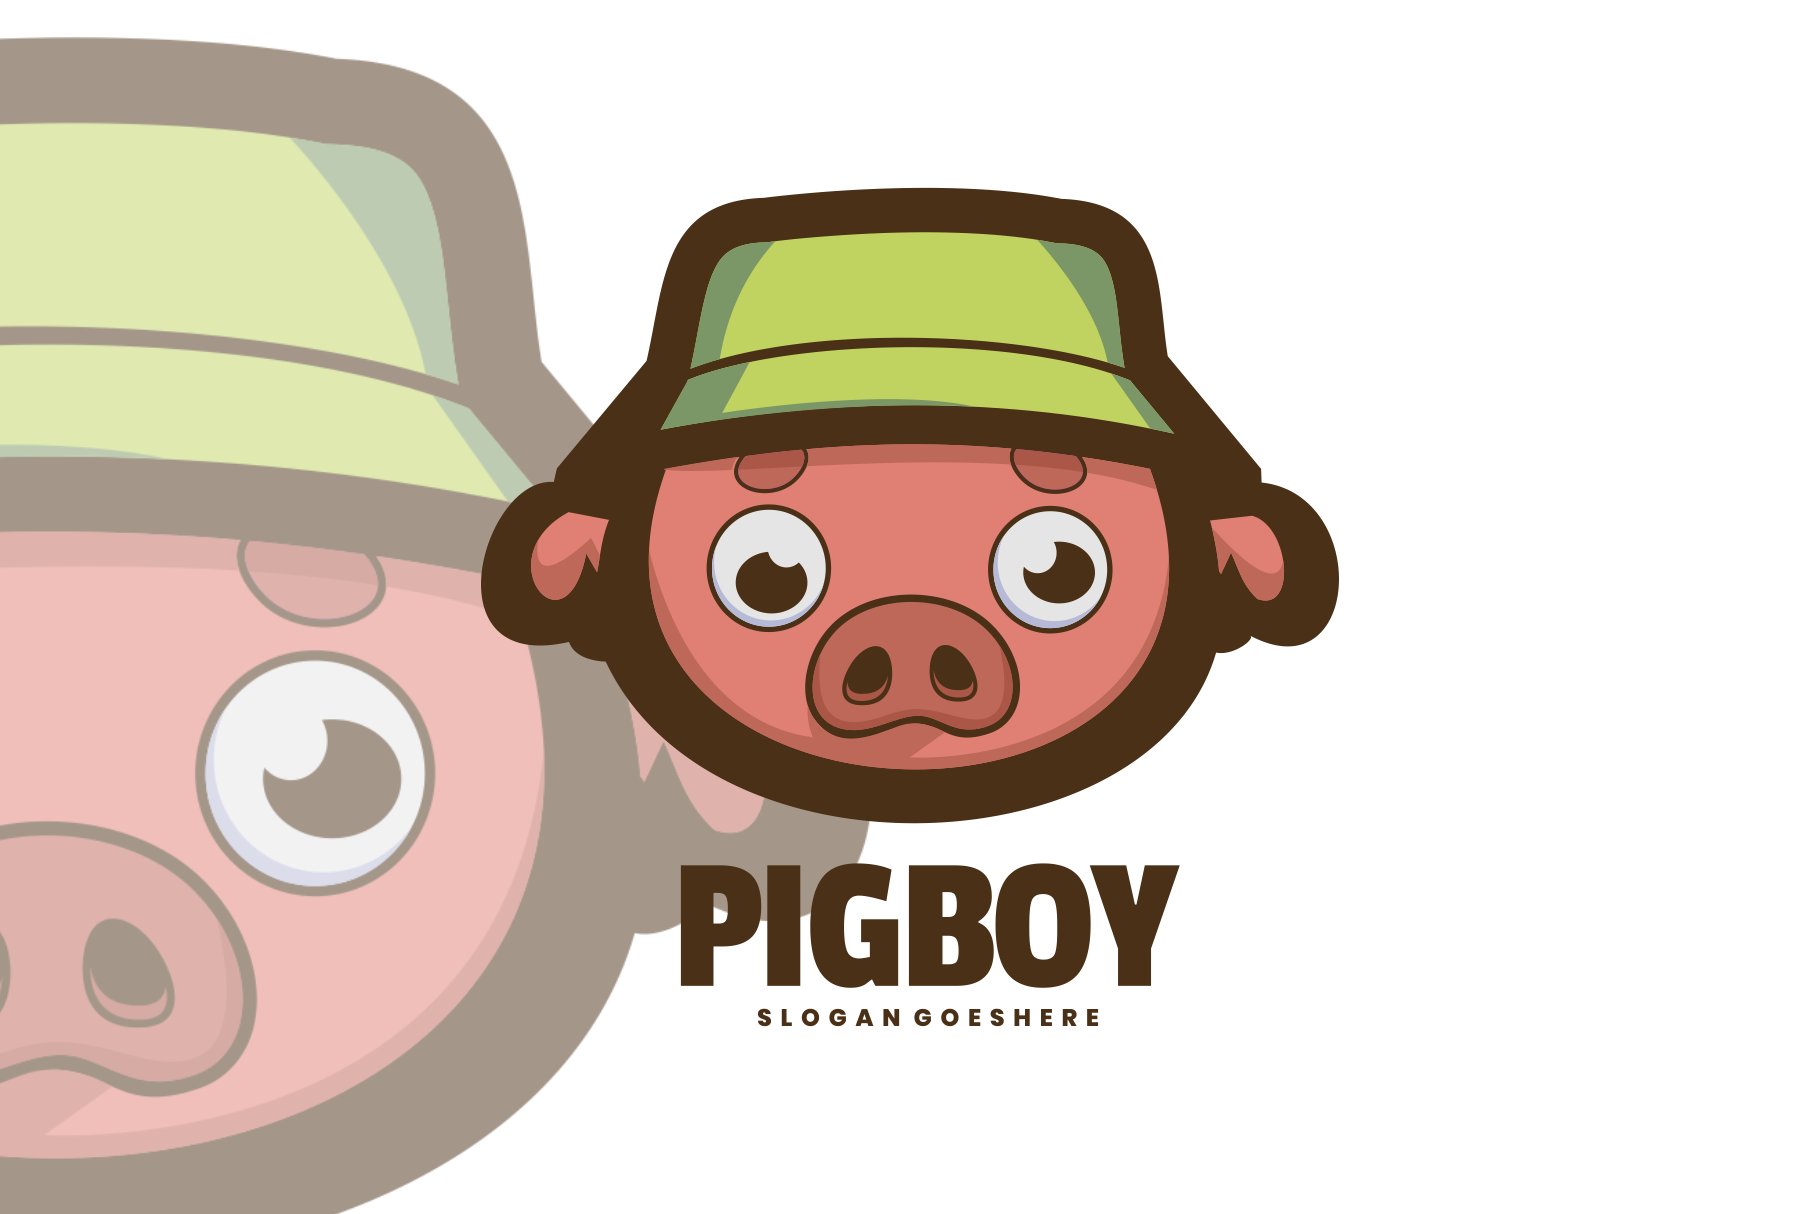 PigBoy Logo Vector cover image.